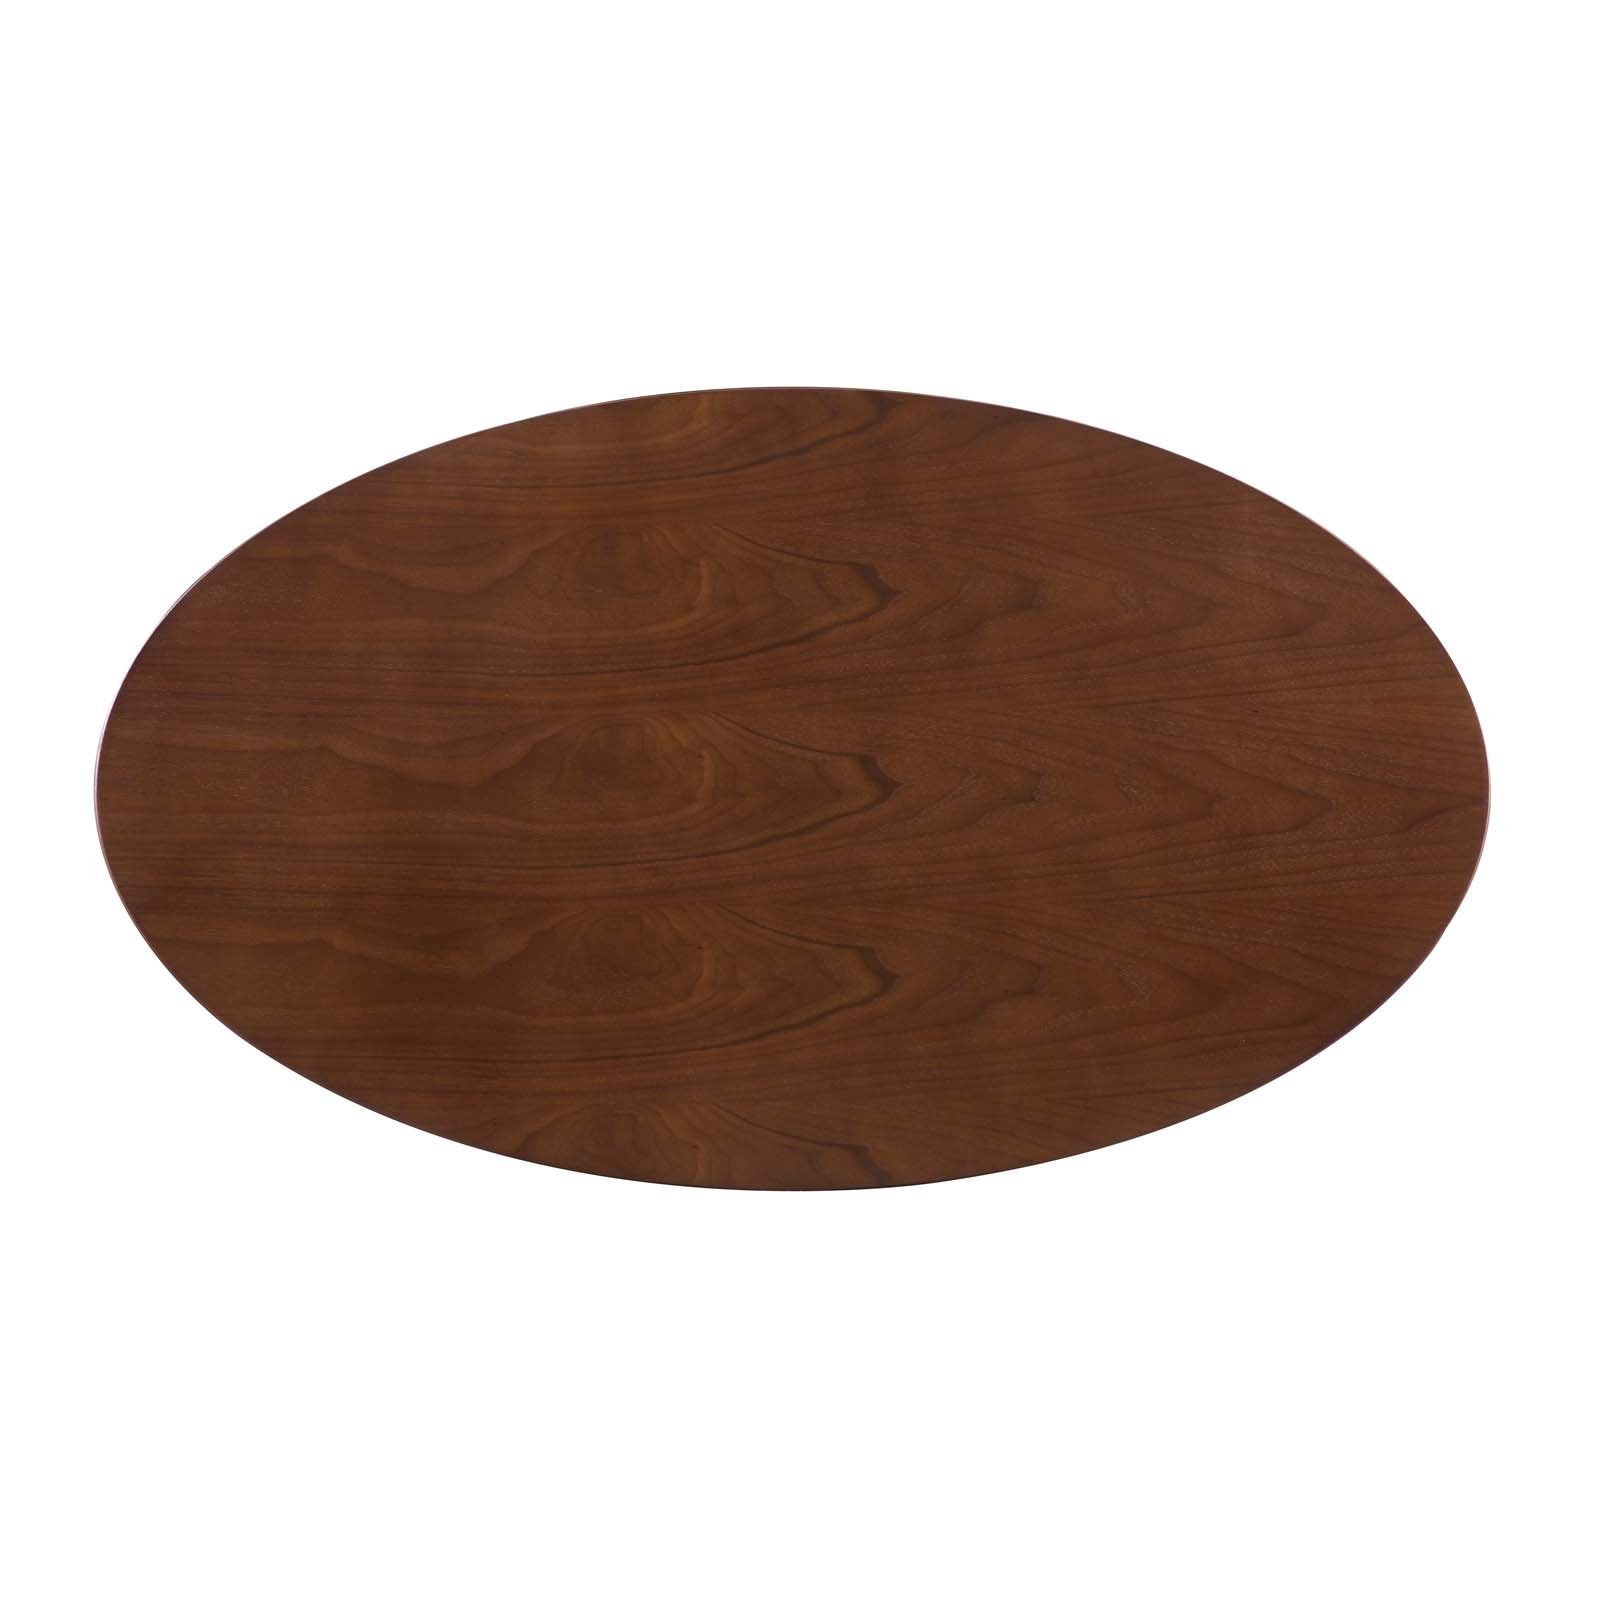 Verne 48" Oval Dining Table - East Shore Modern Home Furnishings